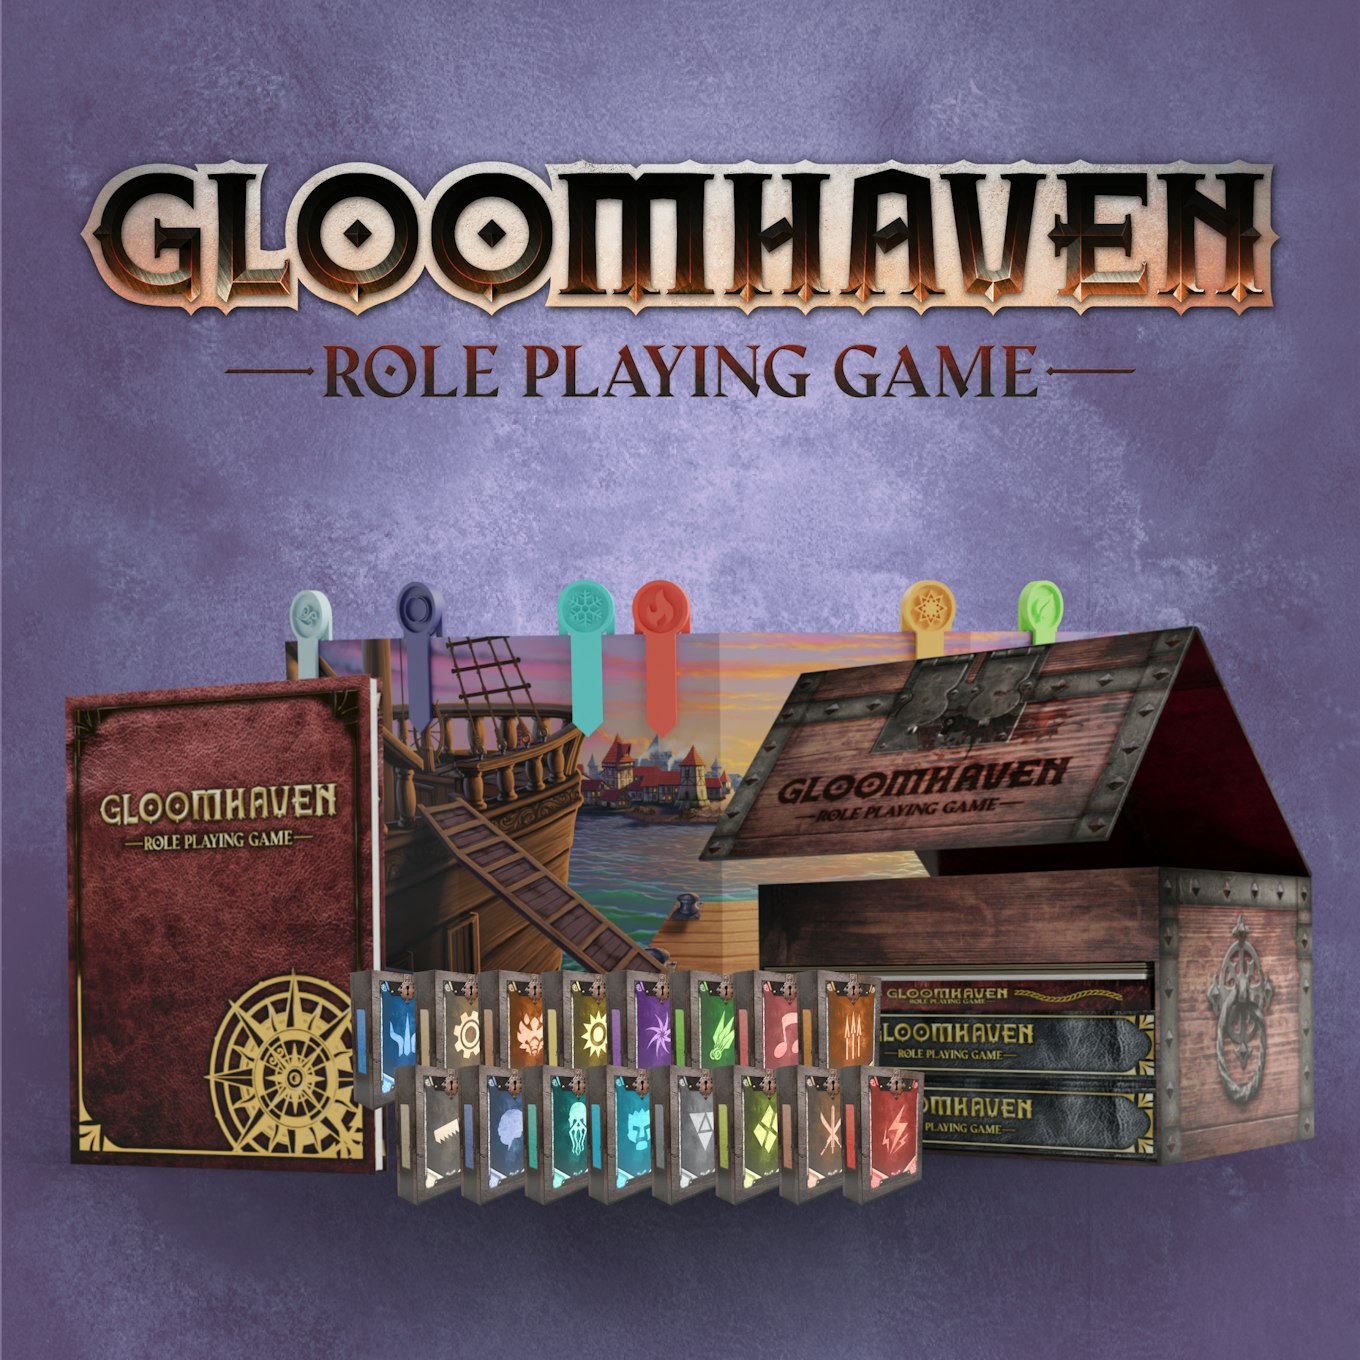 Gloomhaven Offers A Festival Of New Ways To Play